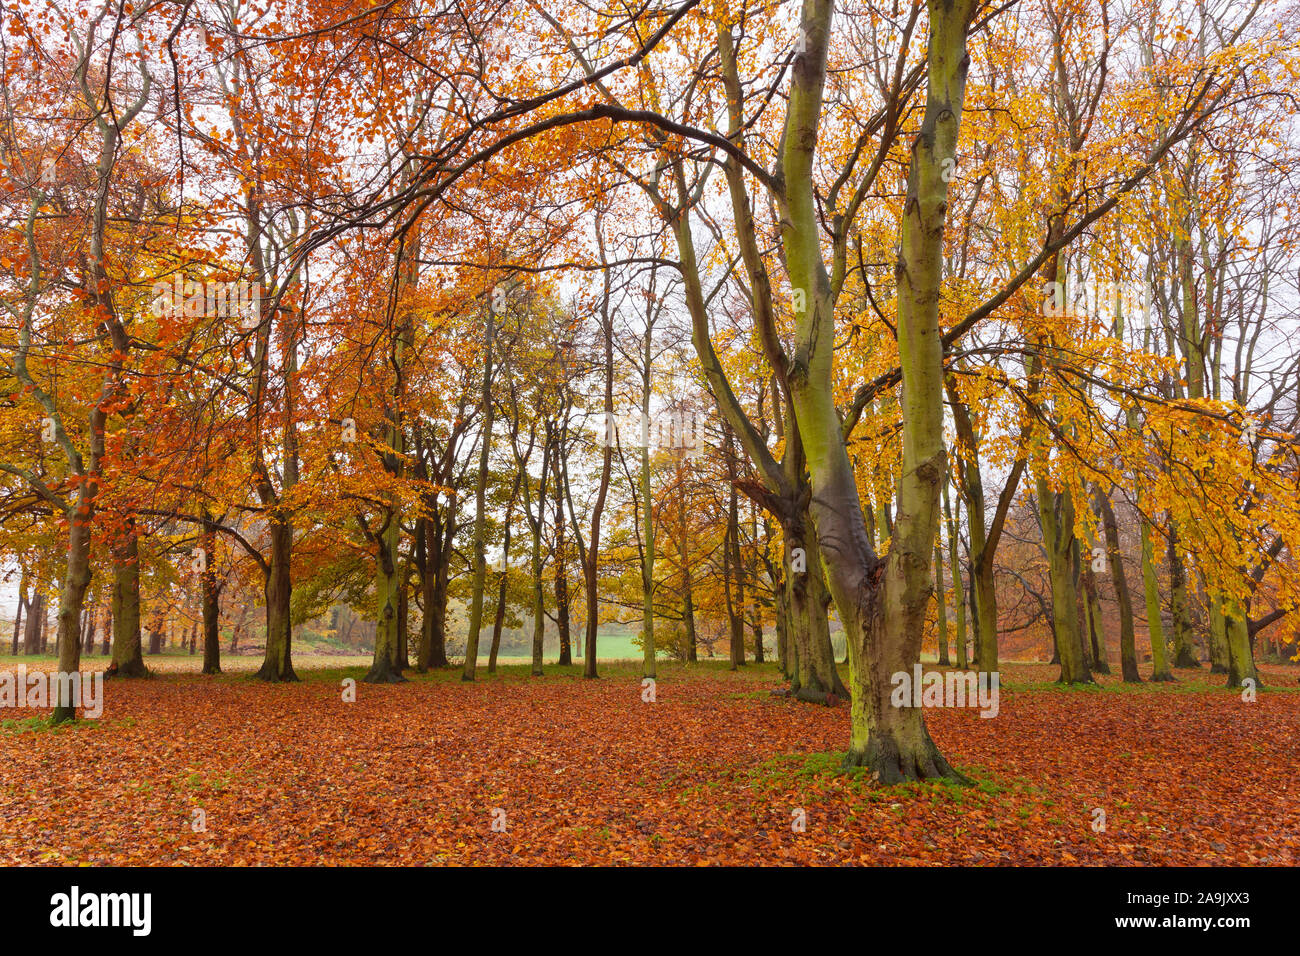 Barton-upon-Humber, North Lincolnshire, UK. 16th November 2019. UK Weather: Beech trees in Baysgarth Park on a dull Autumn morning in November. Credit: LEE BEEL/Alamy Live News. Stock Photo